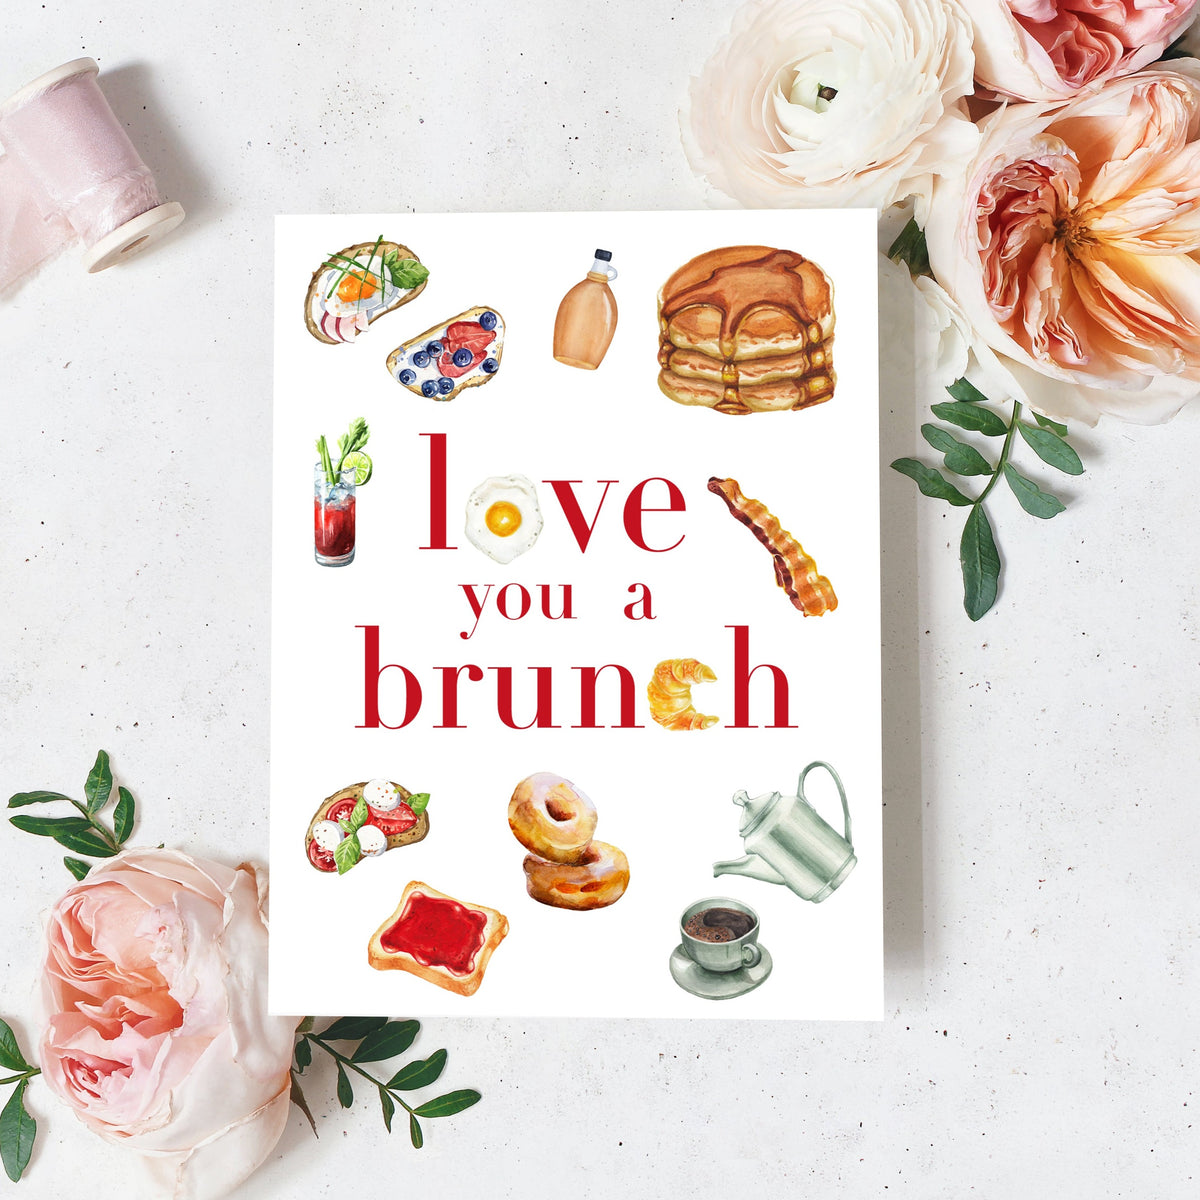 love you a brunch valentines day card with brunch breakfast food on greeting card